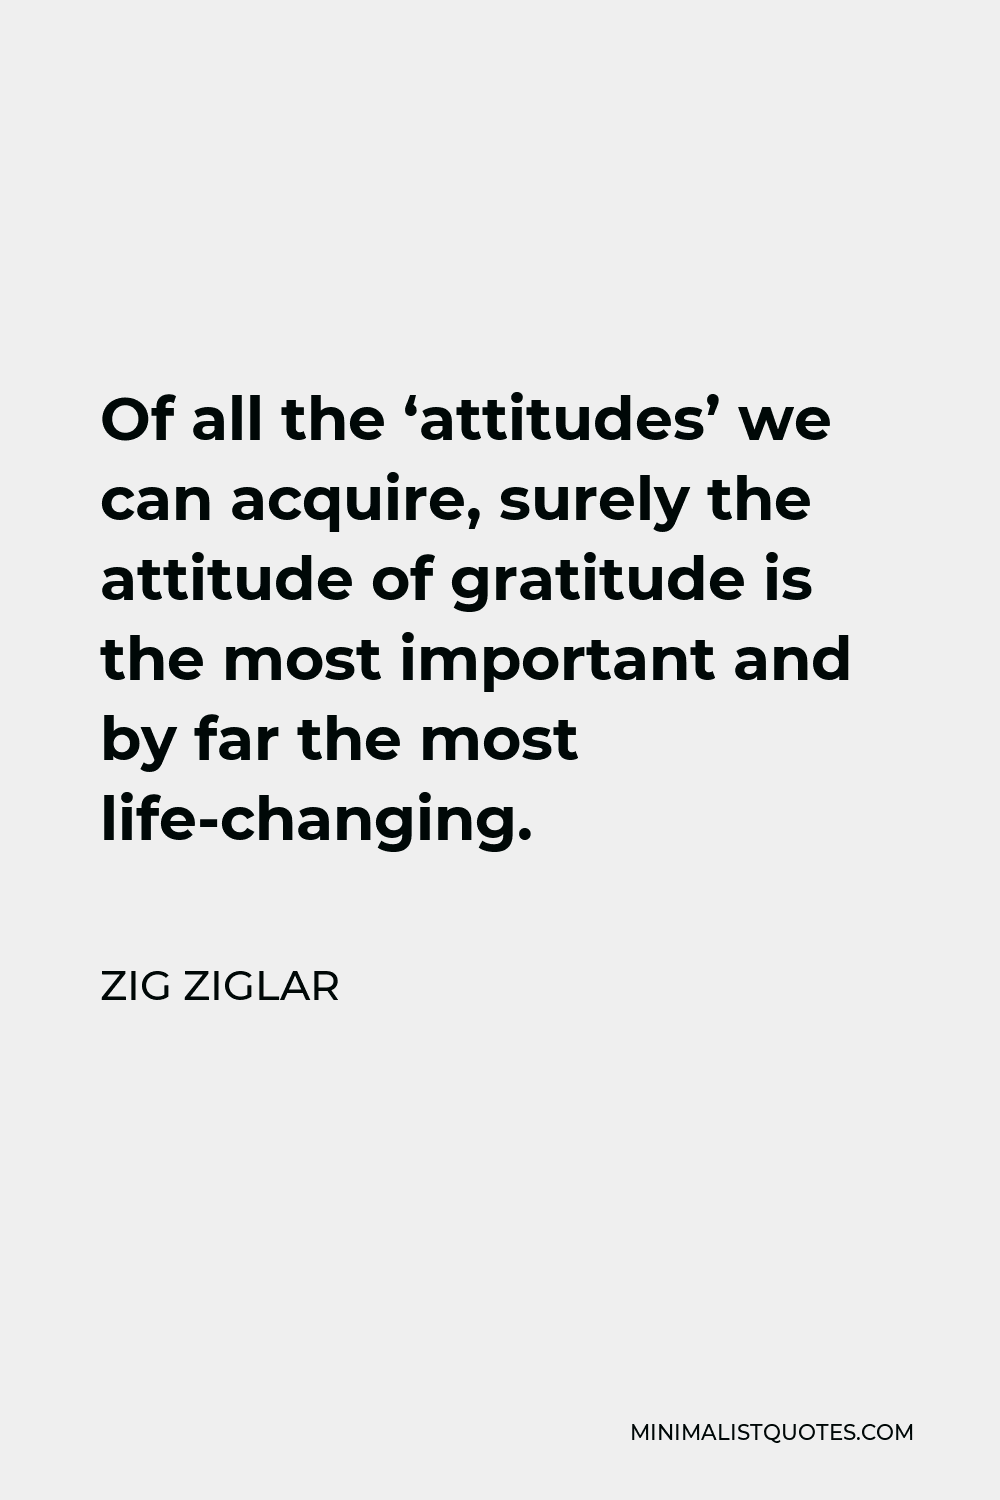 Zig Ziglar Quote - Of all the ‘attitudes’ we can acquire, surely the attitude of gratitude is the most important and by far the most life-changing.